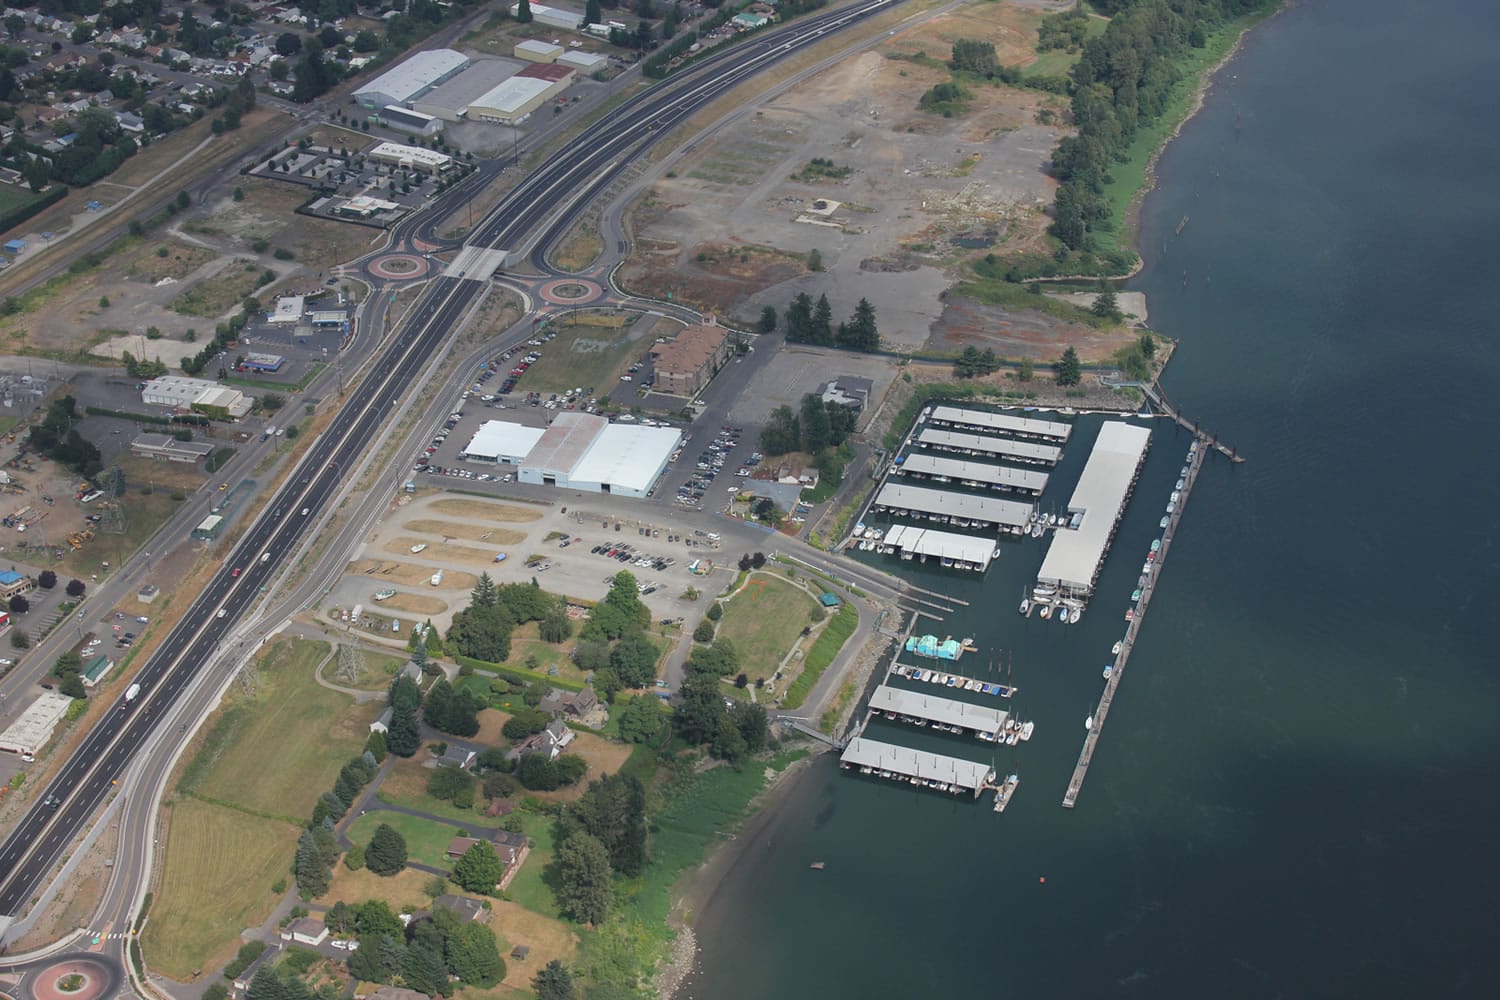 The Port of Camas-Washougal will apply for an estimated $1.15 million in state grant funding to help pay for a new waterfront park and trail as part of a larger effort to rejuvenate 40 acres of waterfront property, located about 1.7 miles away from Washougal's downtown.